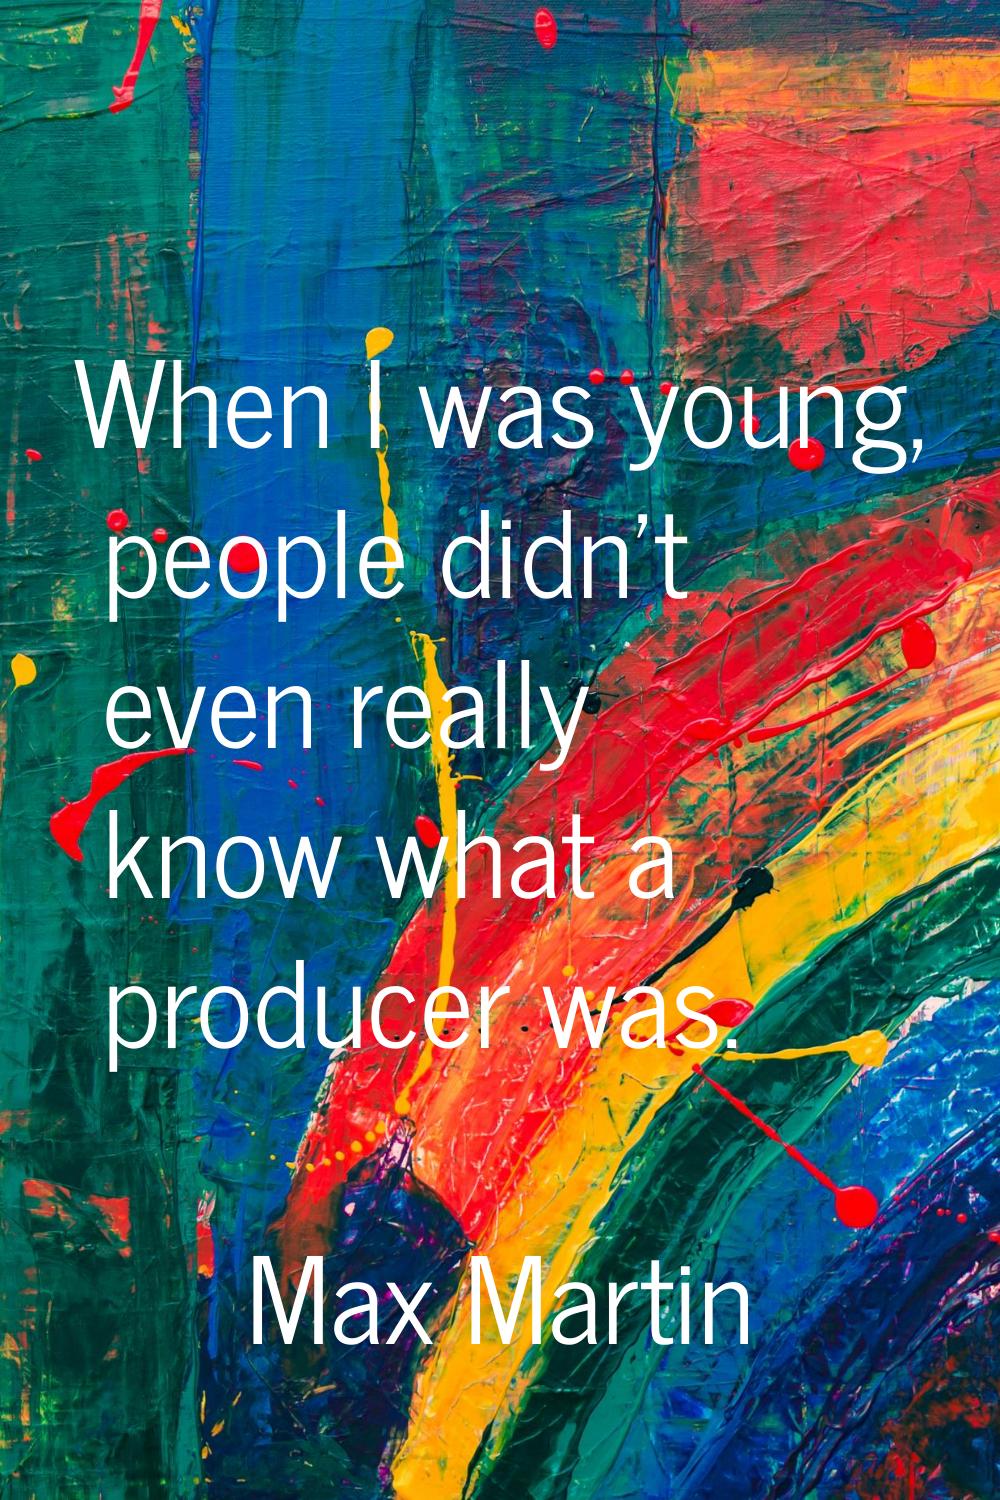 When I was young, people didn't even really know what a producer was.